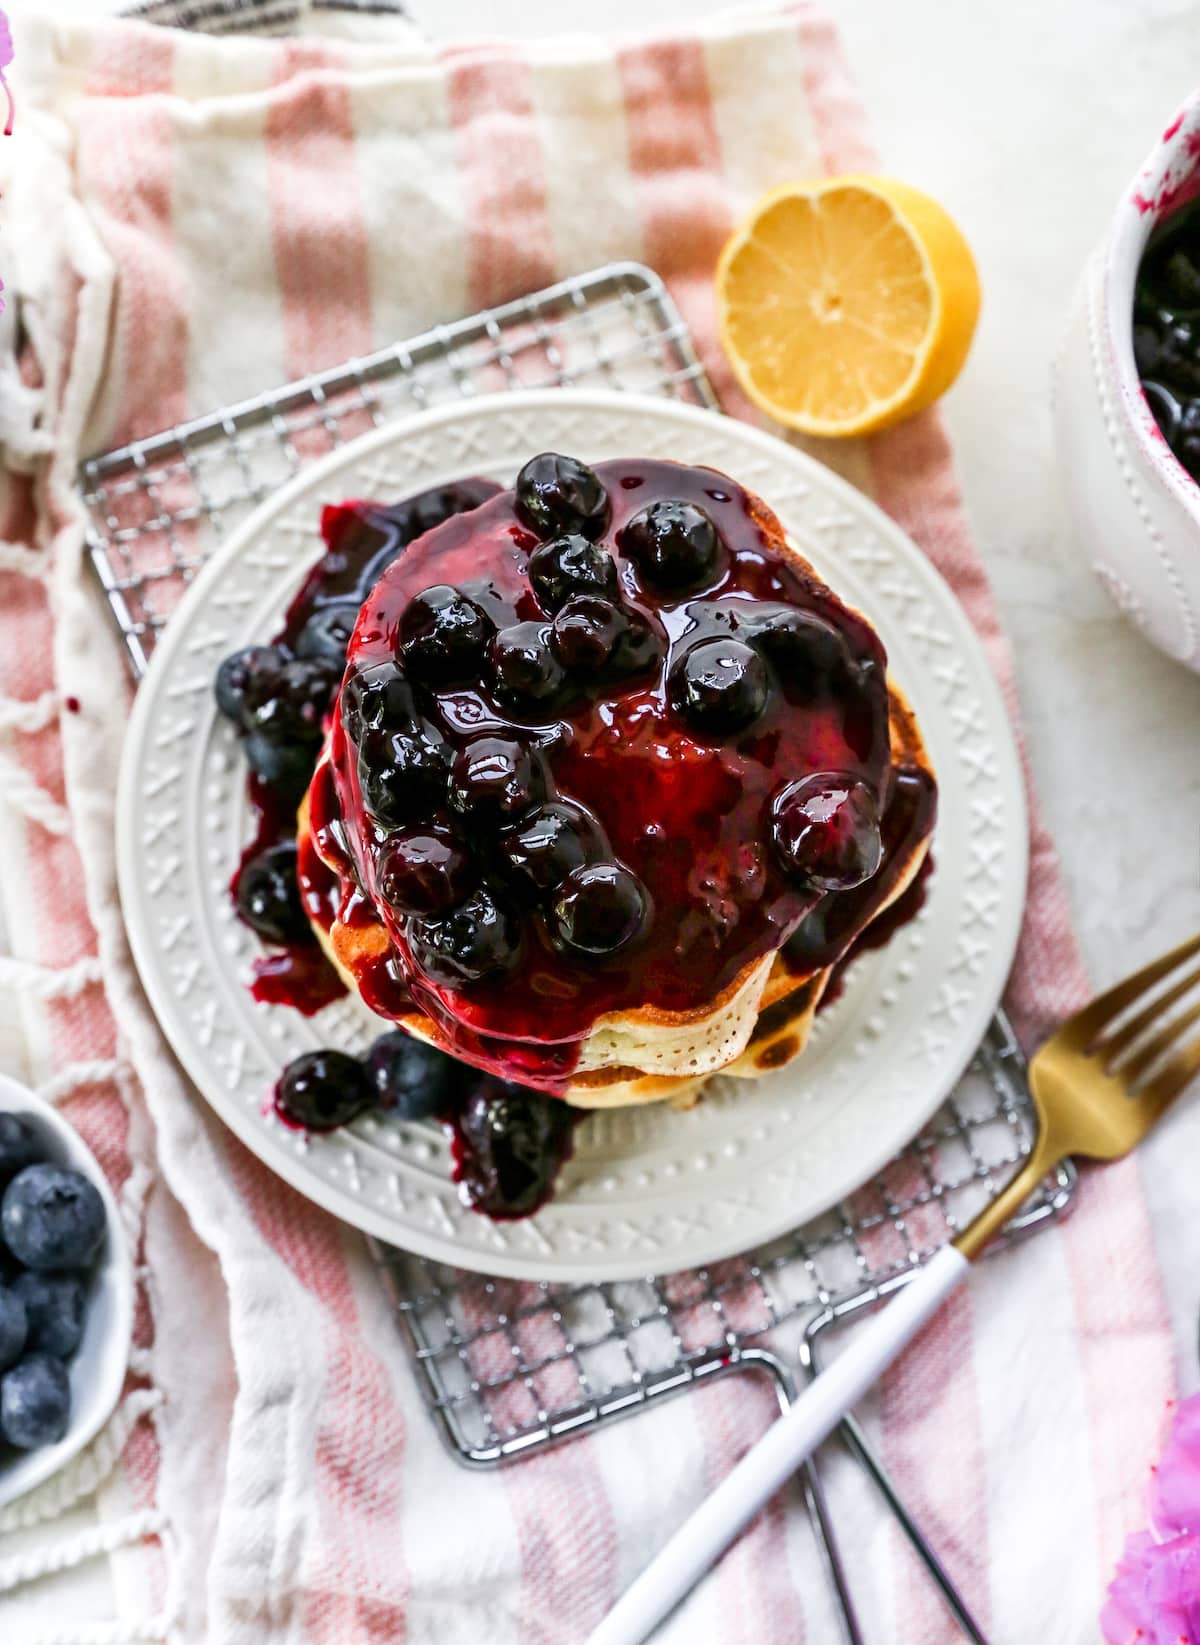 lemon ricotta pancakes with blueberry sauce on plate with fork.